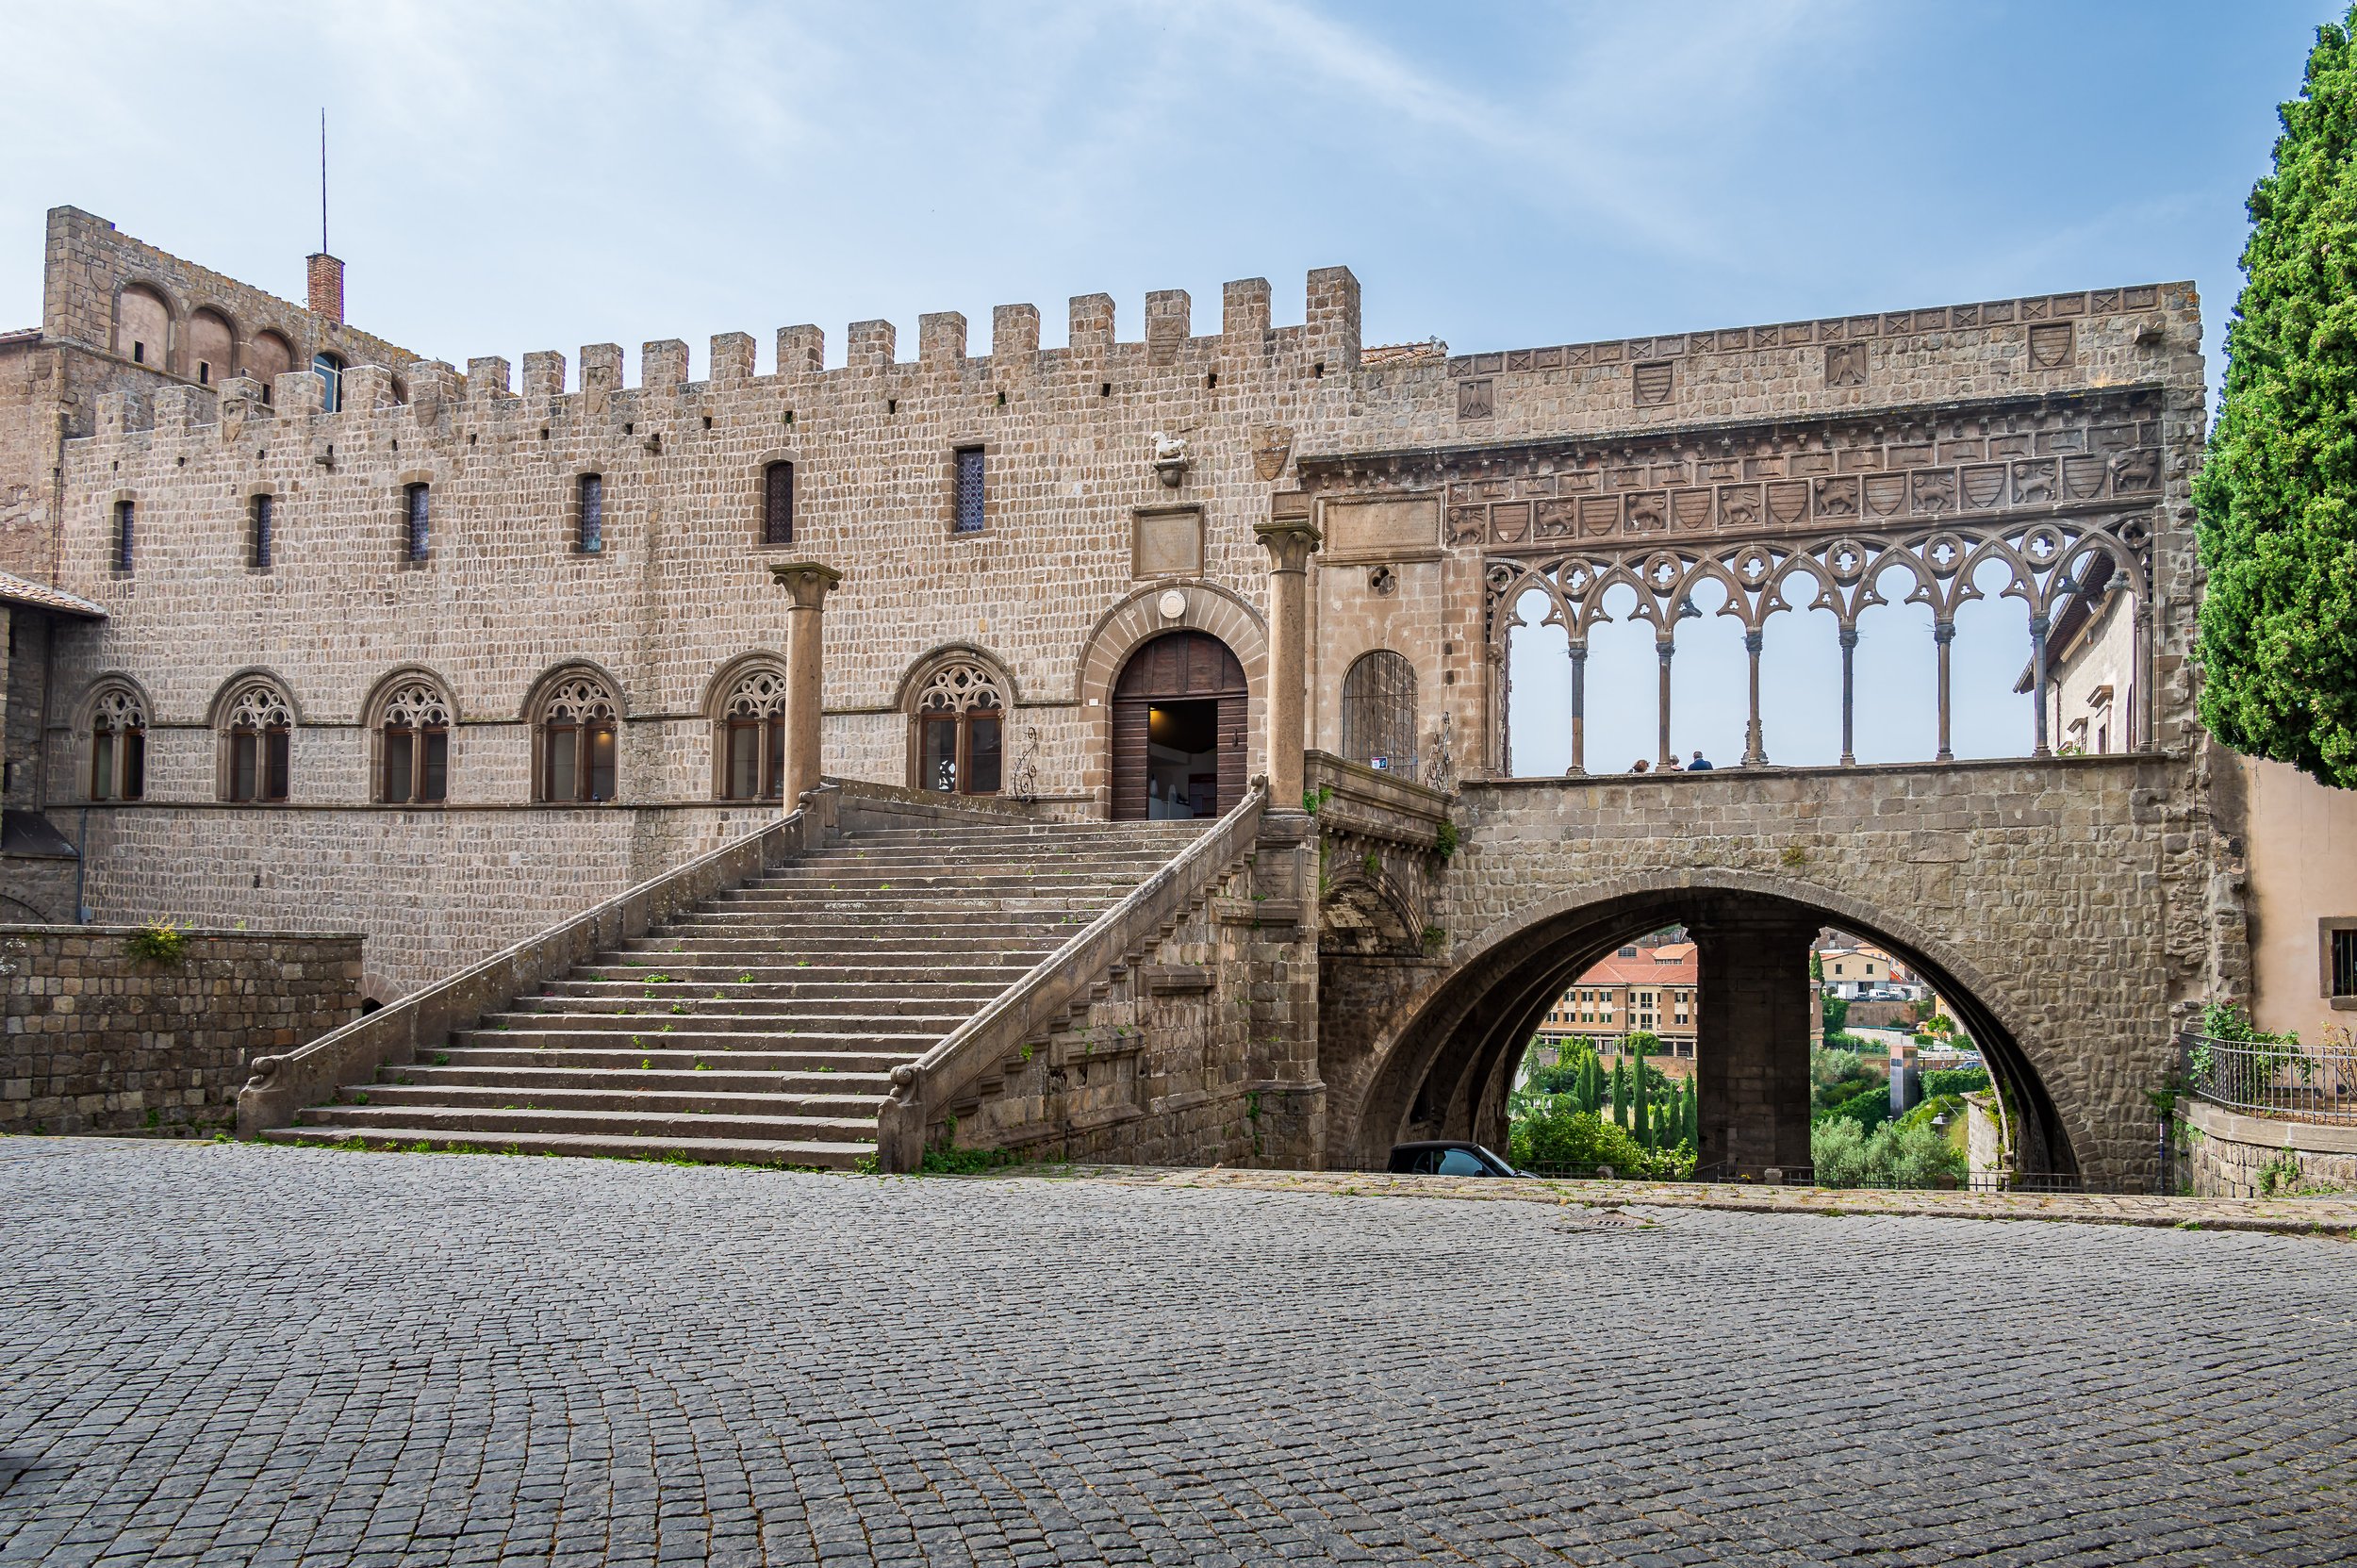 papal-palace-main-attraction-viterbo-palace-hosted-papacy-about-two-decades-13th-century.jpg